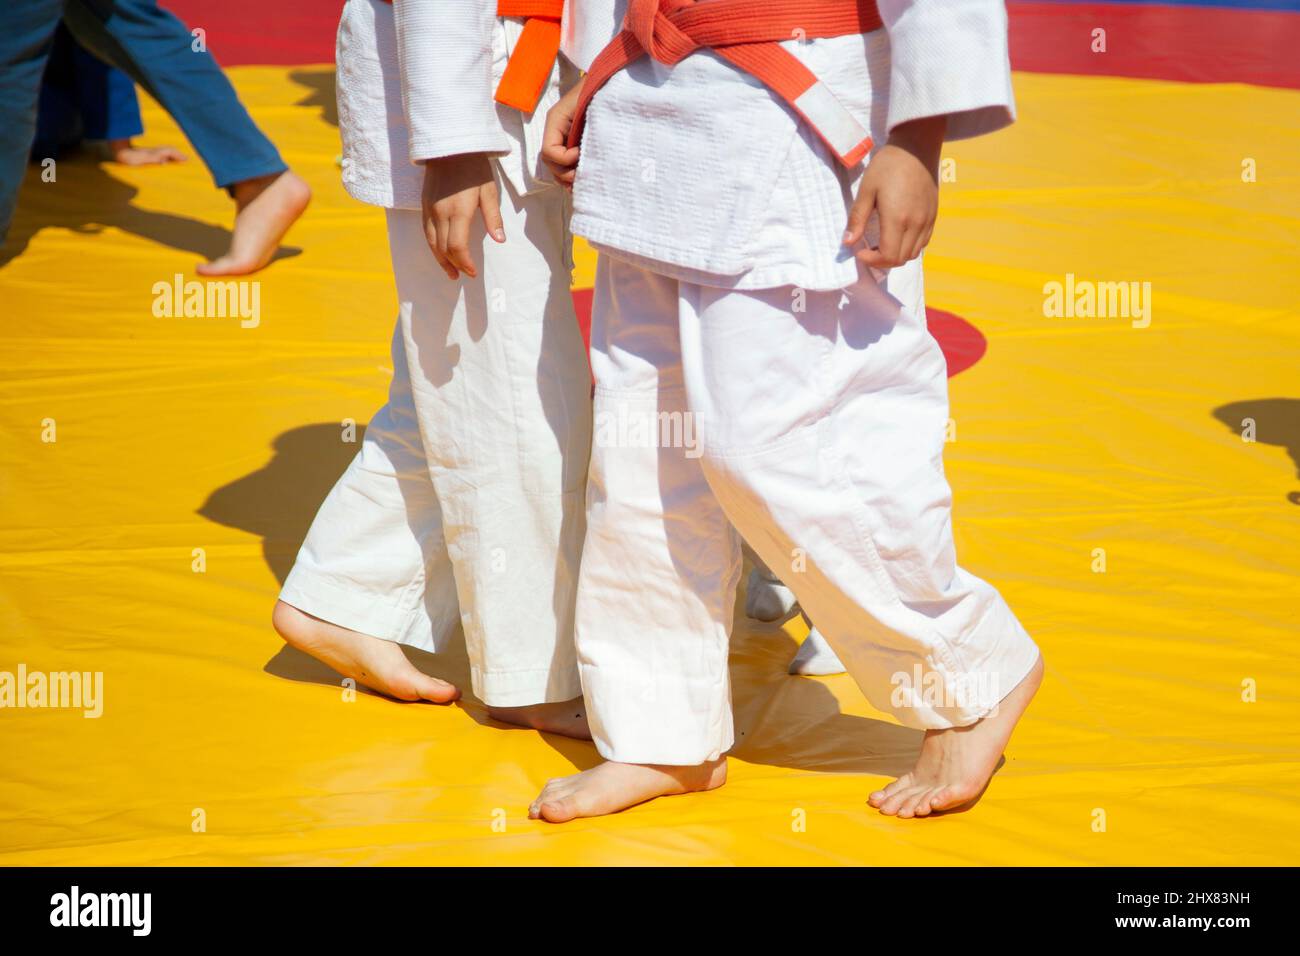 Children's sports competition in judo. Kids in training. Sportswear for a child. Stock Photo